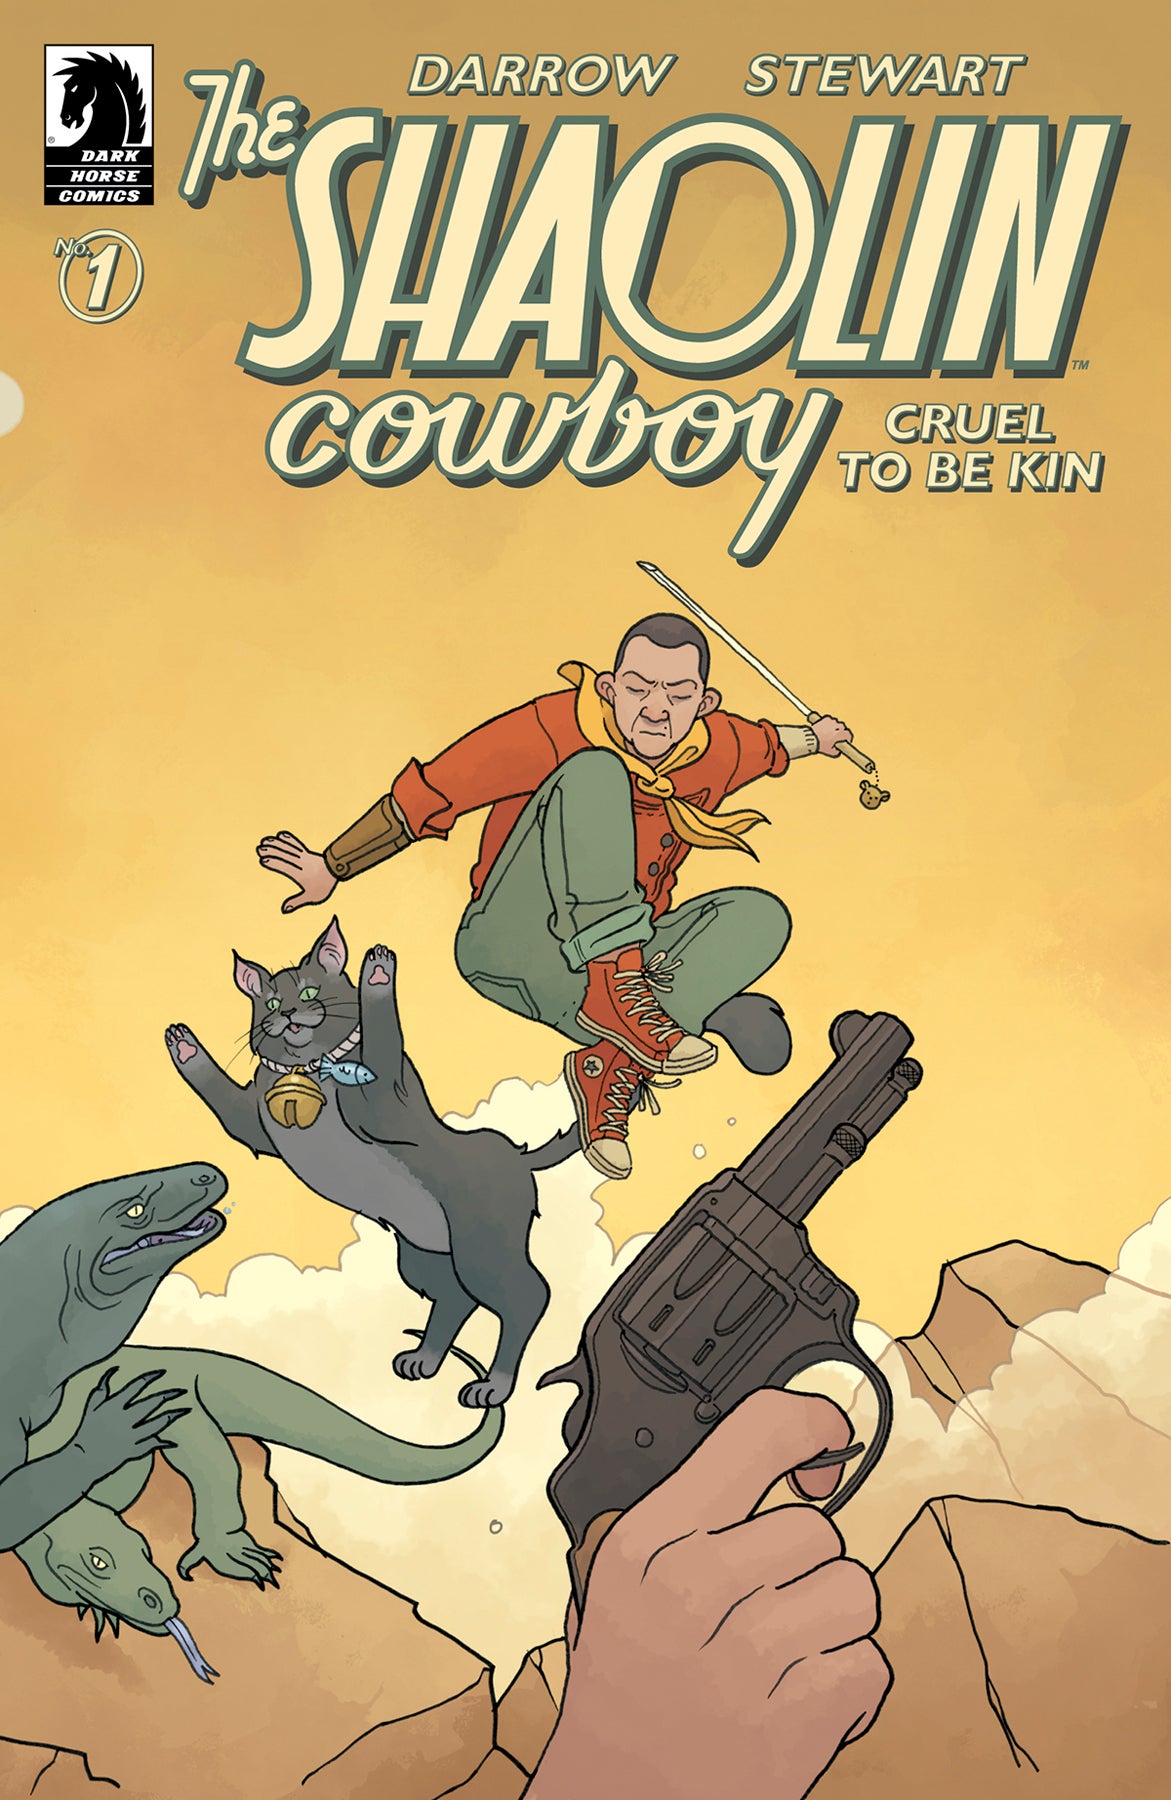 Shaolin Cowboy: Cruel to Be Kin #1 variant cover by Alice Darrow, Geof's daughter. (Image: Dark Horse Comics)